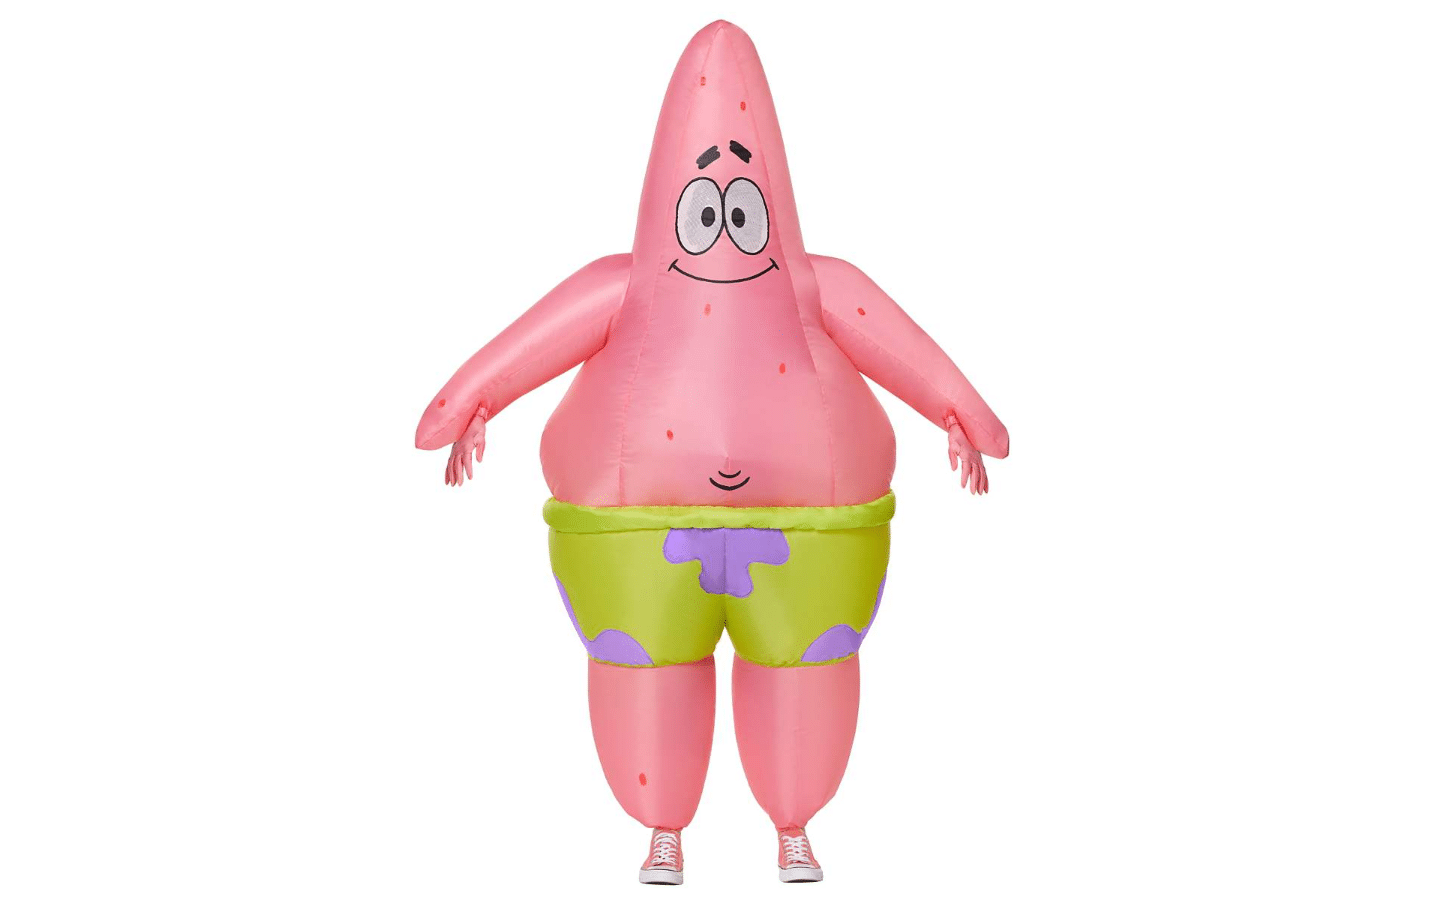 Funny Inflatable Costumes 2022: Patrick Starfish for Halloween 2022